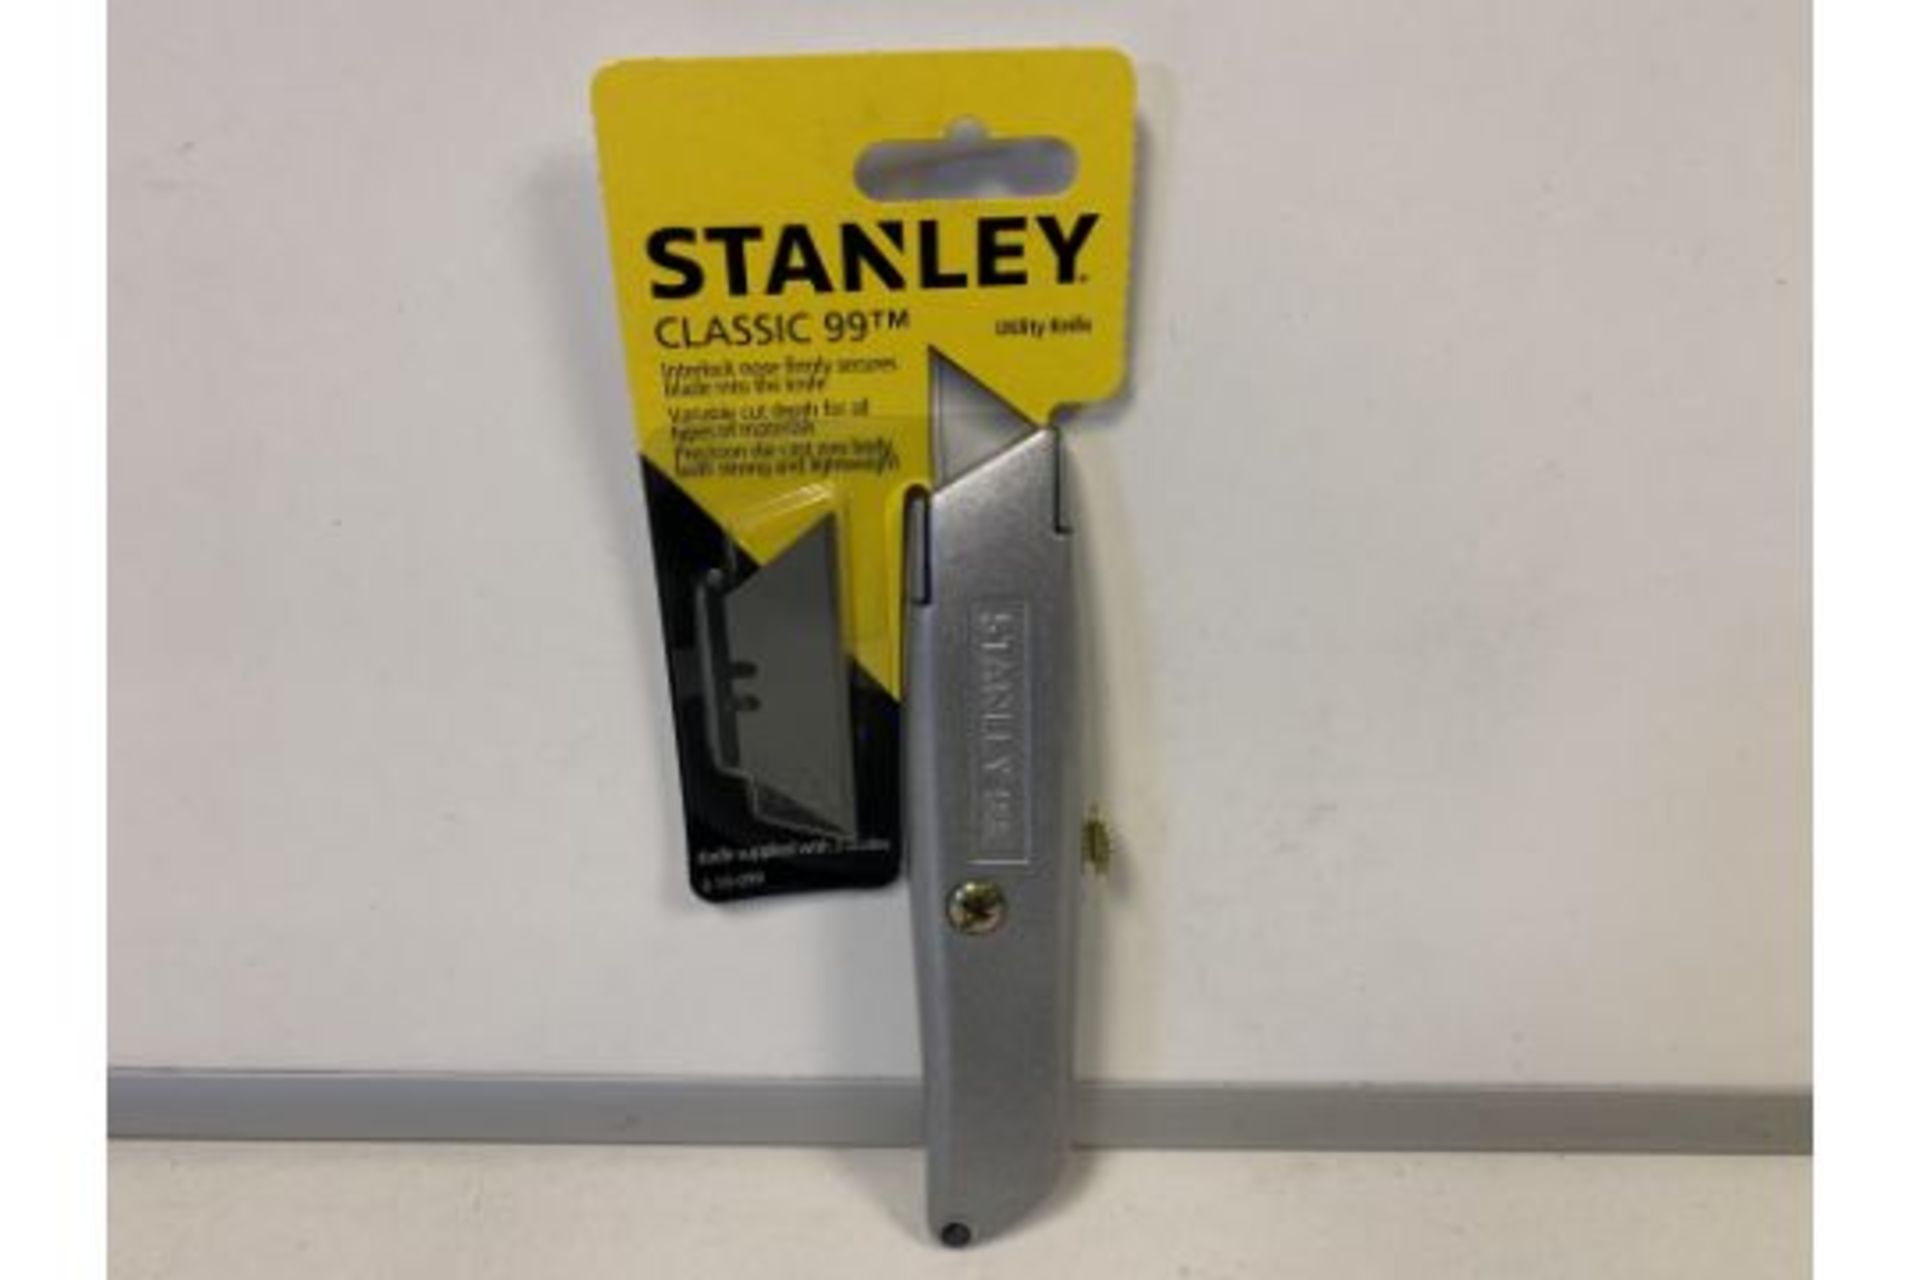 8 x NEW PACKAGED STANLEY CLASSIC 99 KNIFE WITH 3 BLADES (18+ ONLY - ID REQUIRED) (1157/13)